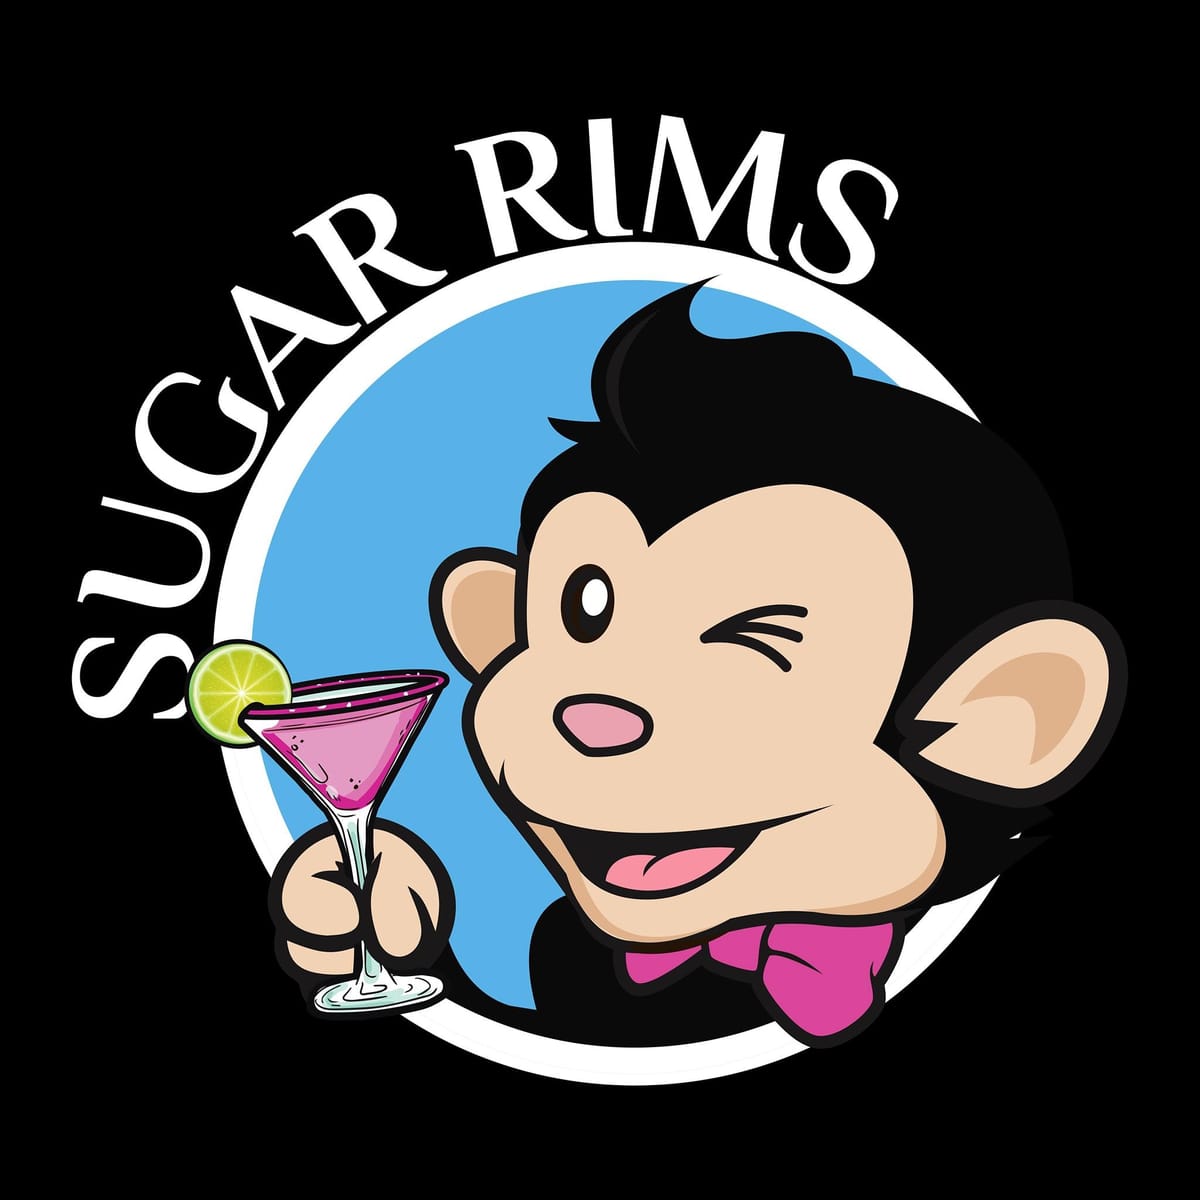 A Dash of Reviews, A Splash of Growth: The Sugar Rims Cocktails Experience with Kudobuzz